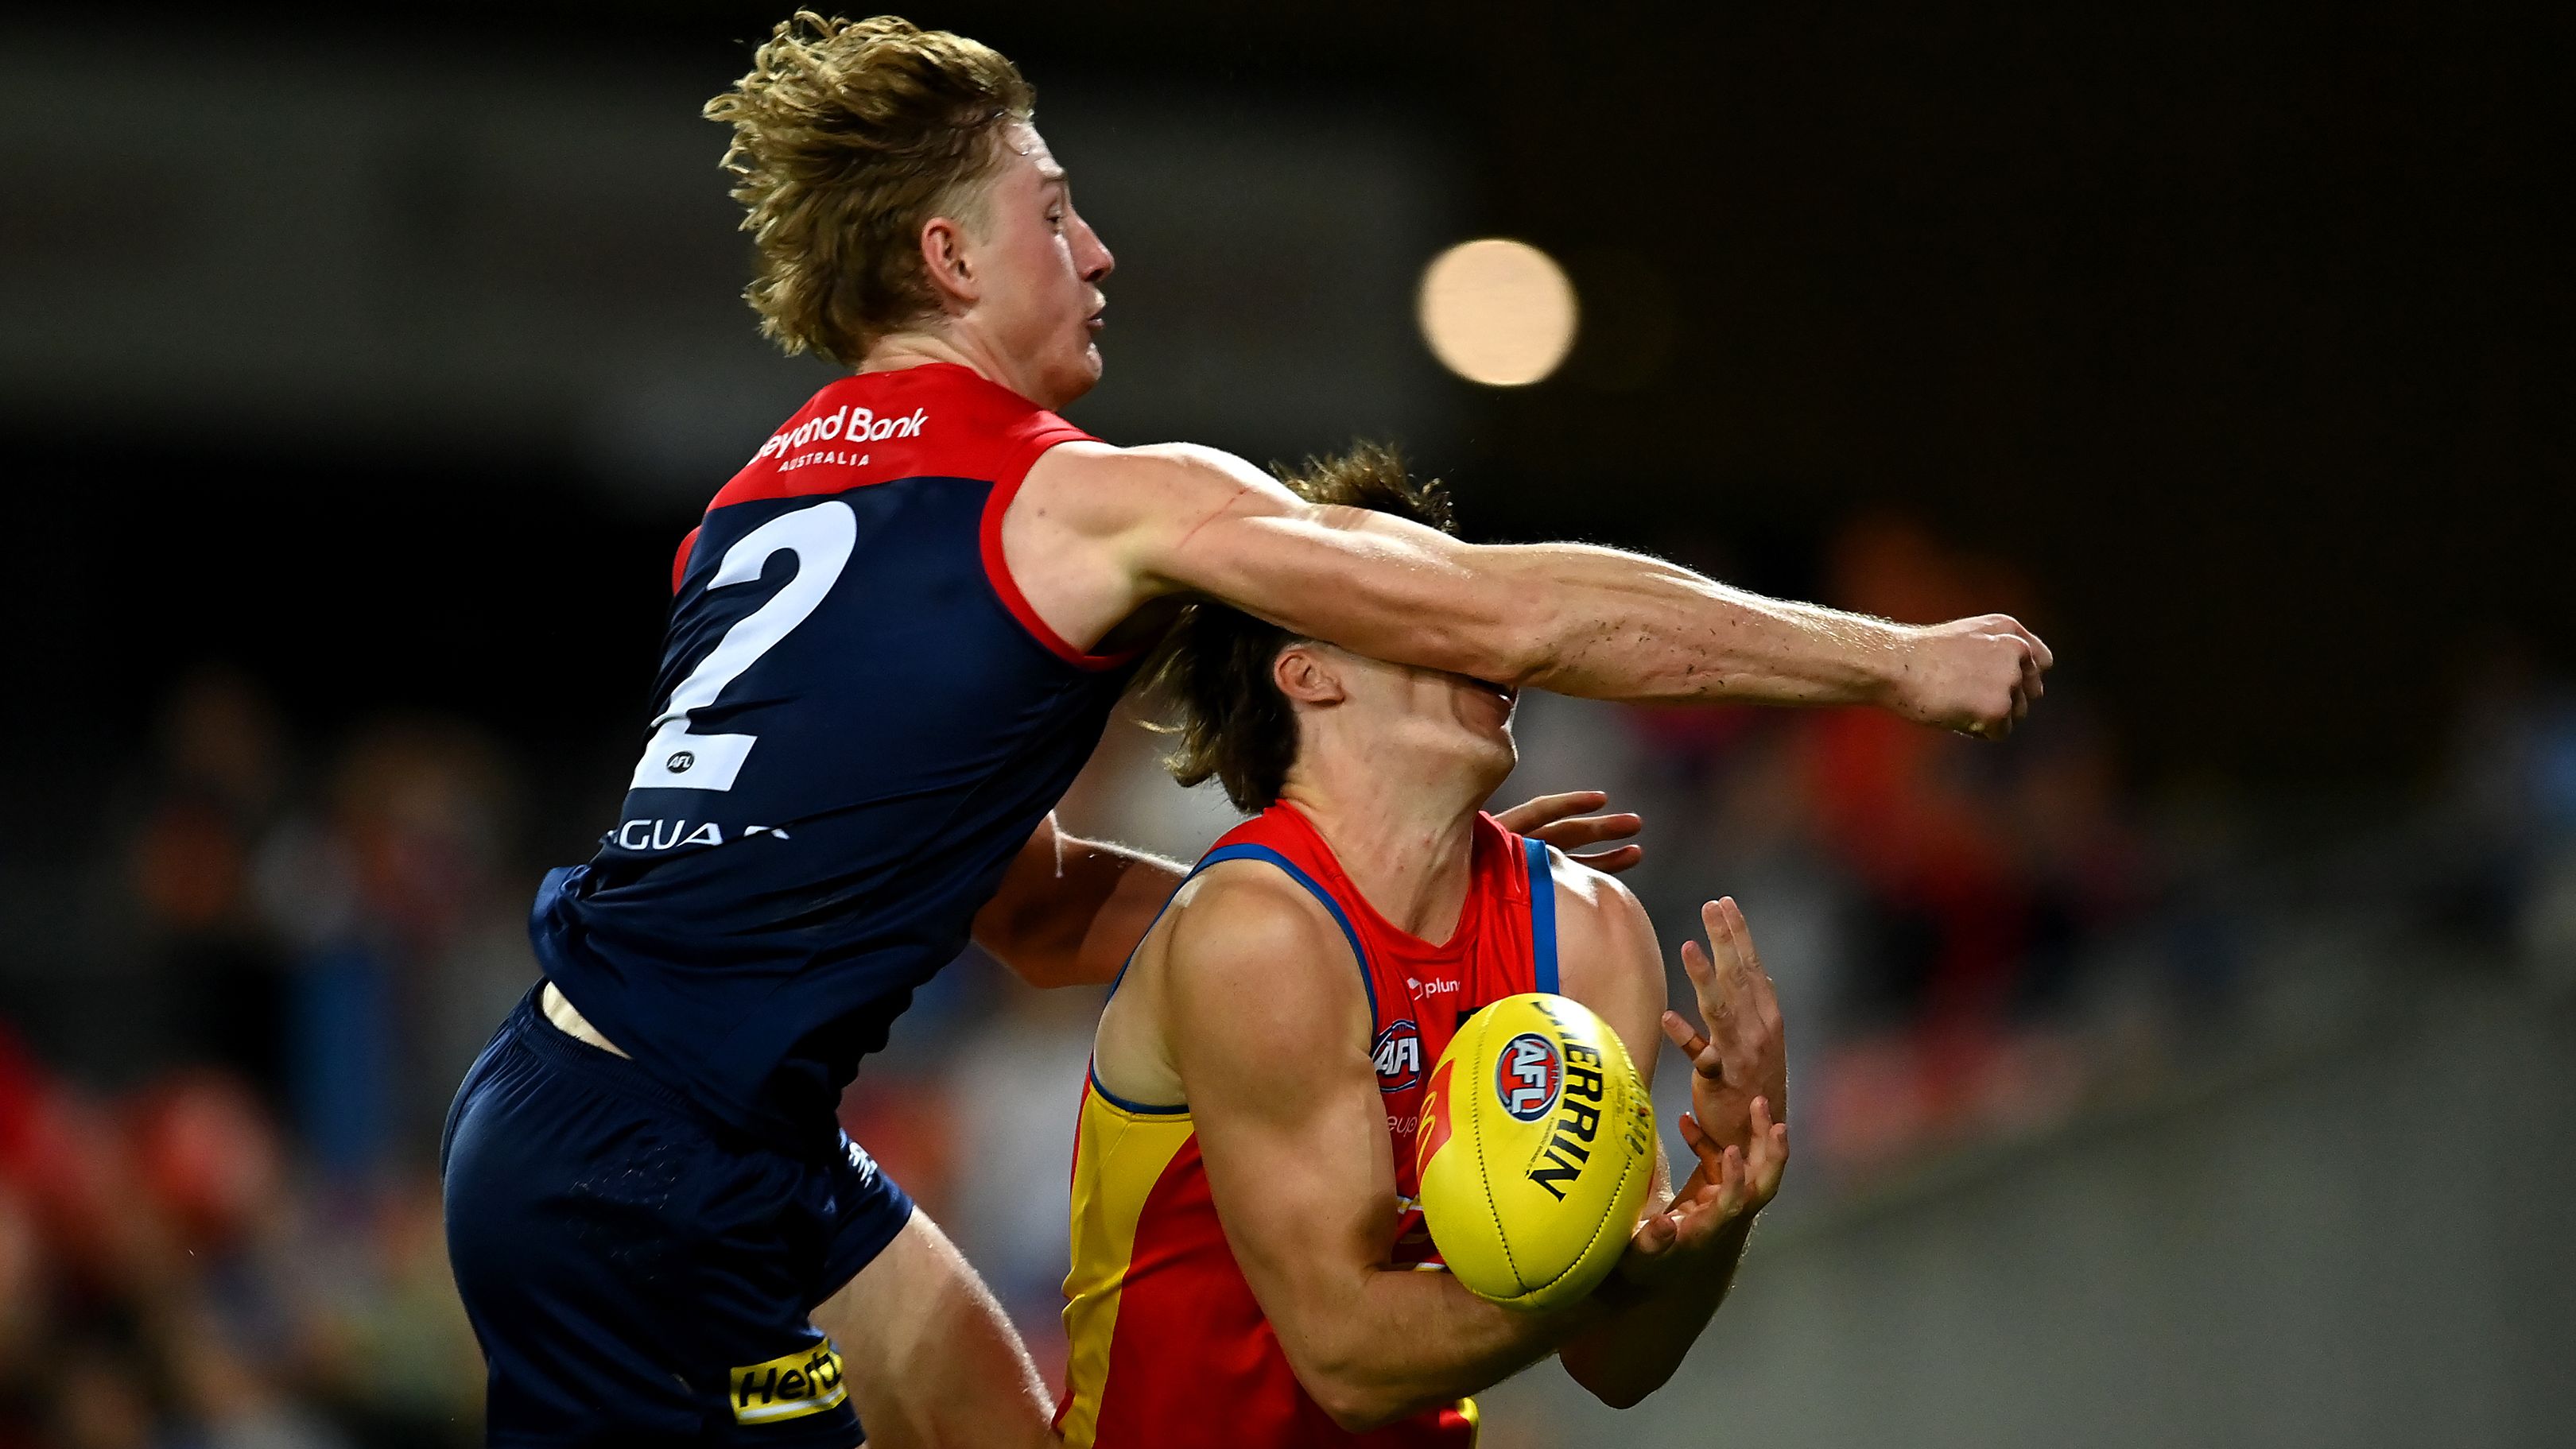 GOLD COAST, AUSTRALIA - MAY 06: Charlie Ballard of the Suns suffers an injury while challenging for the ball against Jacob van Rooyen of the Demons  during the round eight AFL match between the Gold Coast Suns and the Melbourne Demons at Heritage Bank Stadium, on May 06, 2023, in Gold Coast, Australia. (Photo by Albert Perez/AFL Photos via Getty Images)